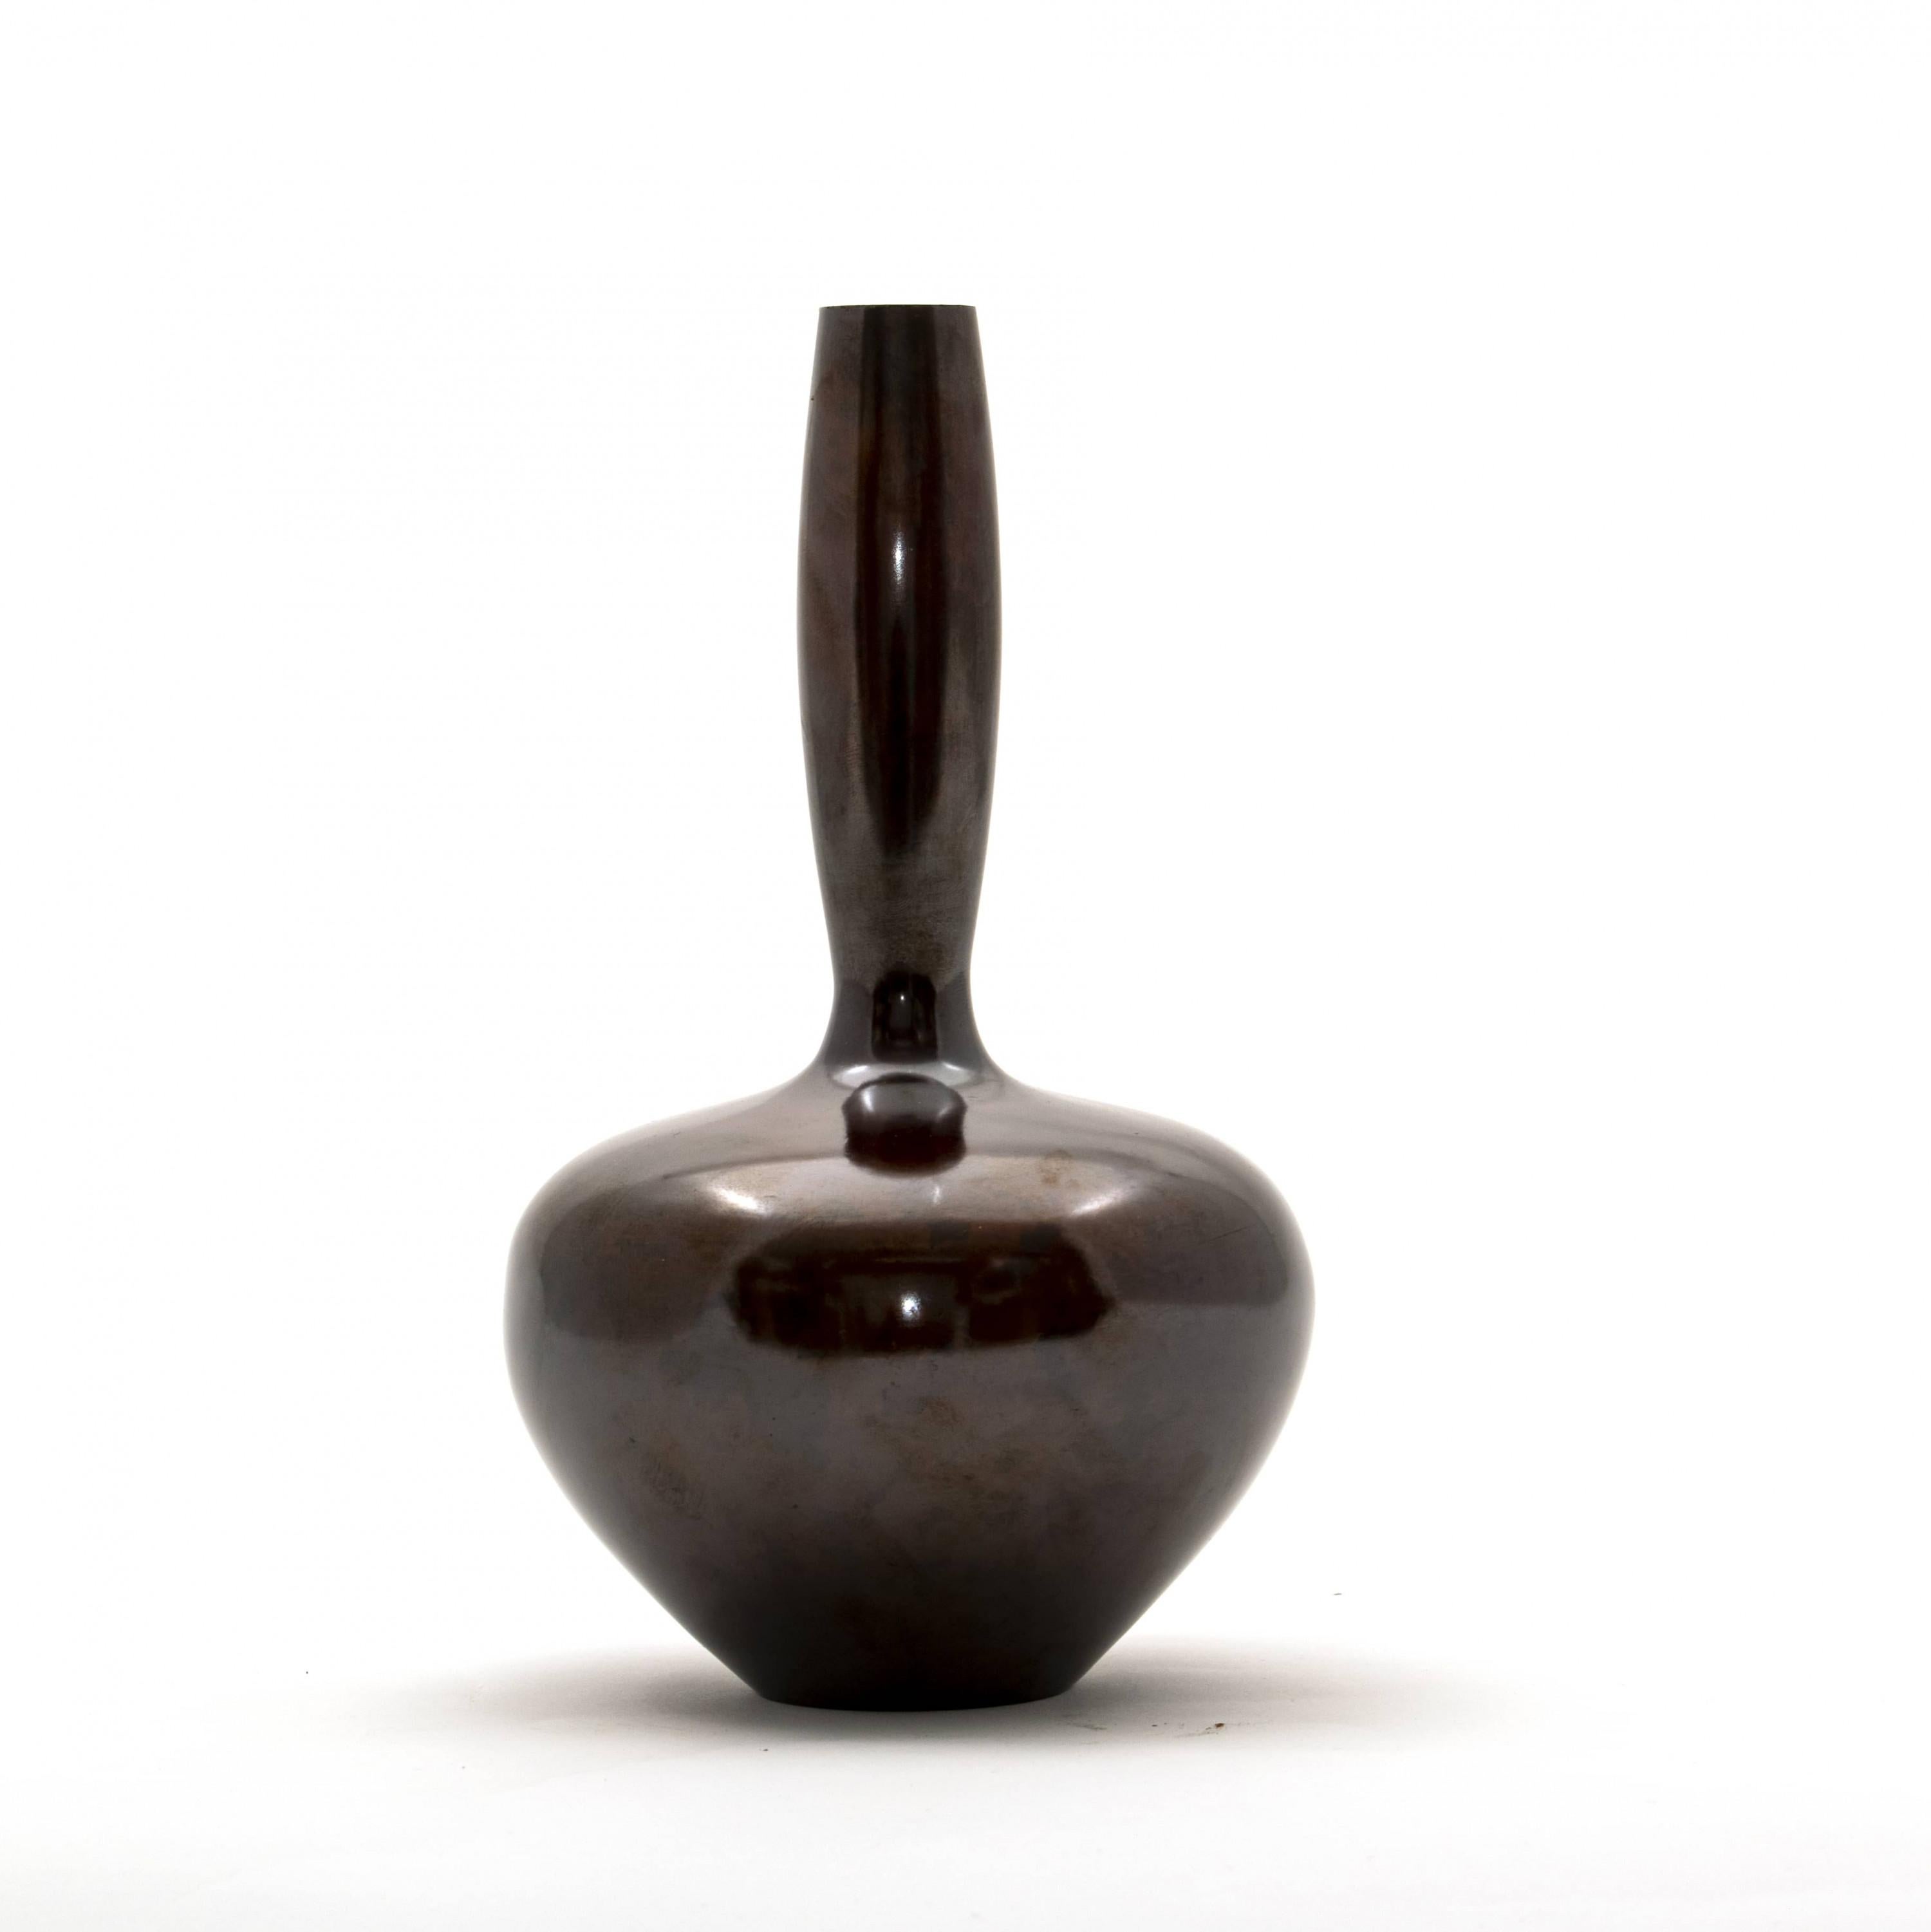 Tsuda Eijyu (1915-2000).
A Japanese patinated bronze vase of globular form with a long and narrow neck. Seal marked.
Vases like this one is used to decorate single flower arrangement in Japanese traditional tea ceremony.

Tsuda Eijyu (1915-2000)